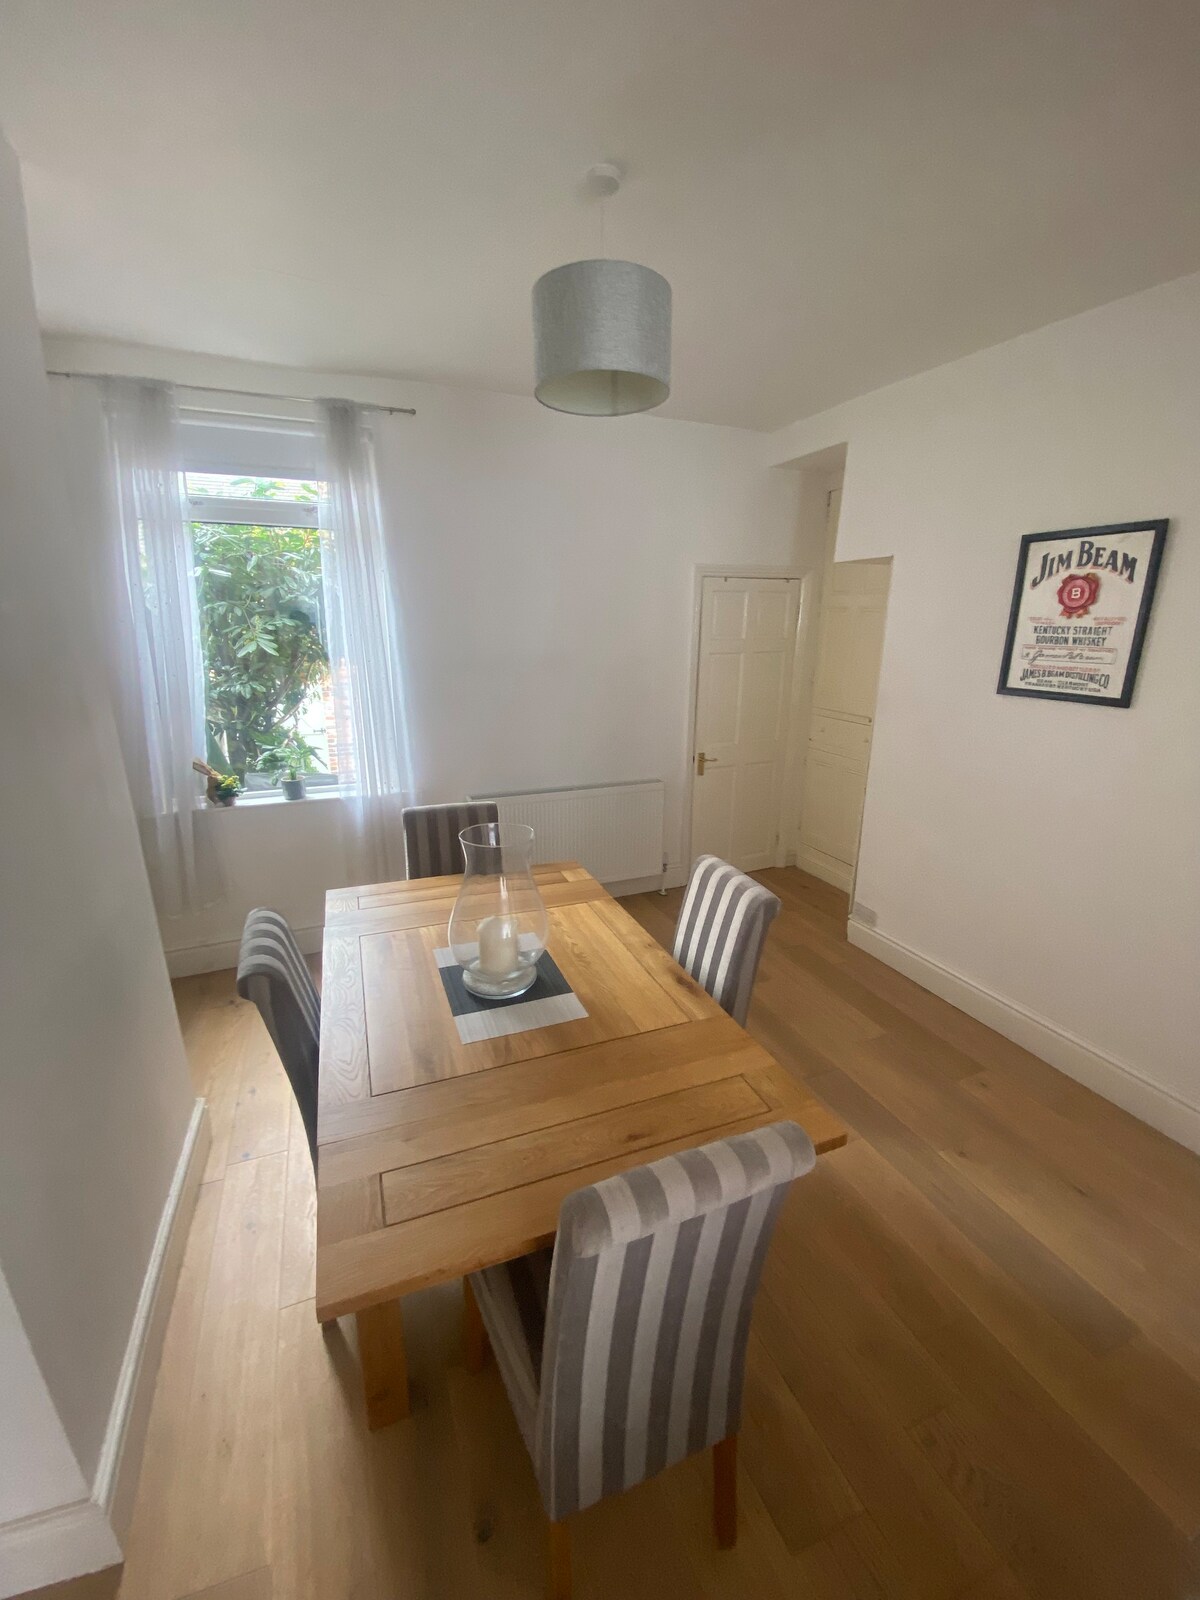 2 bed house by Sefton Park